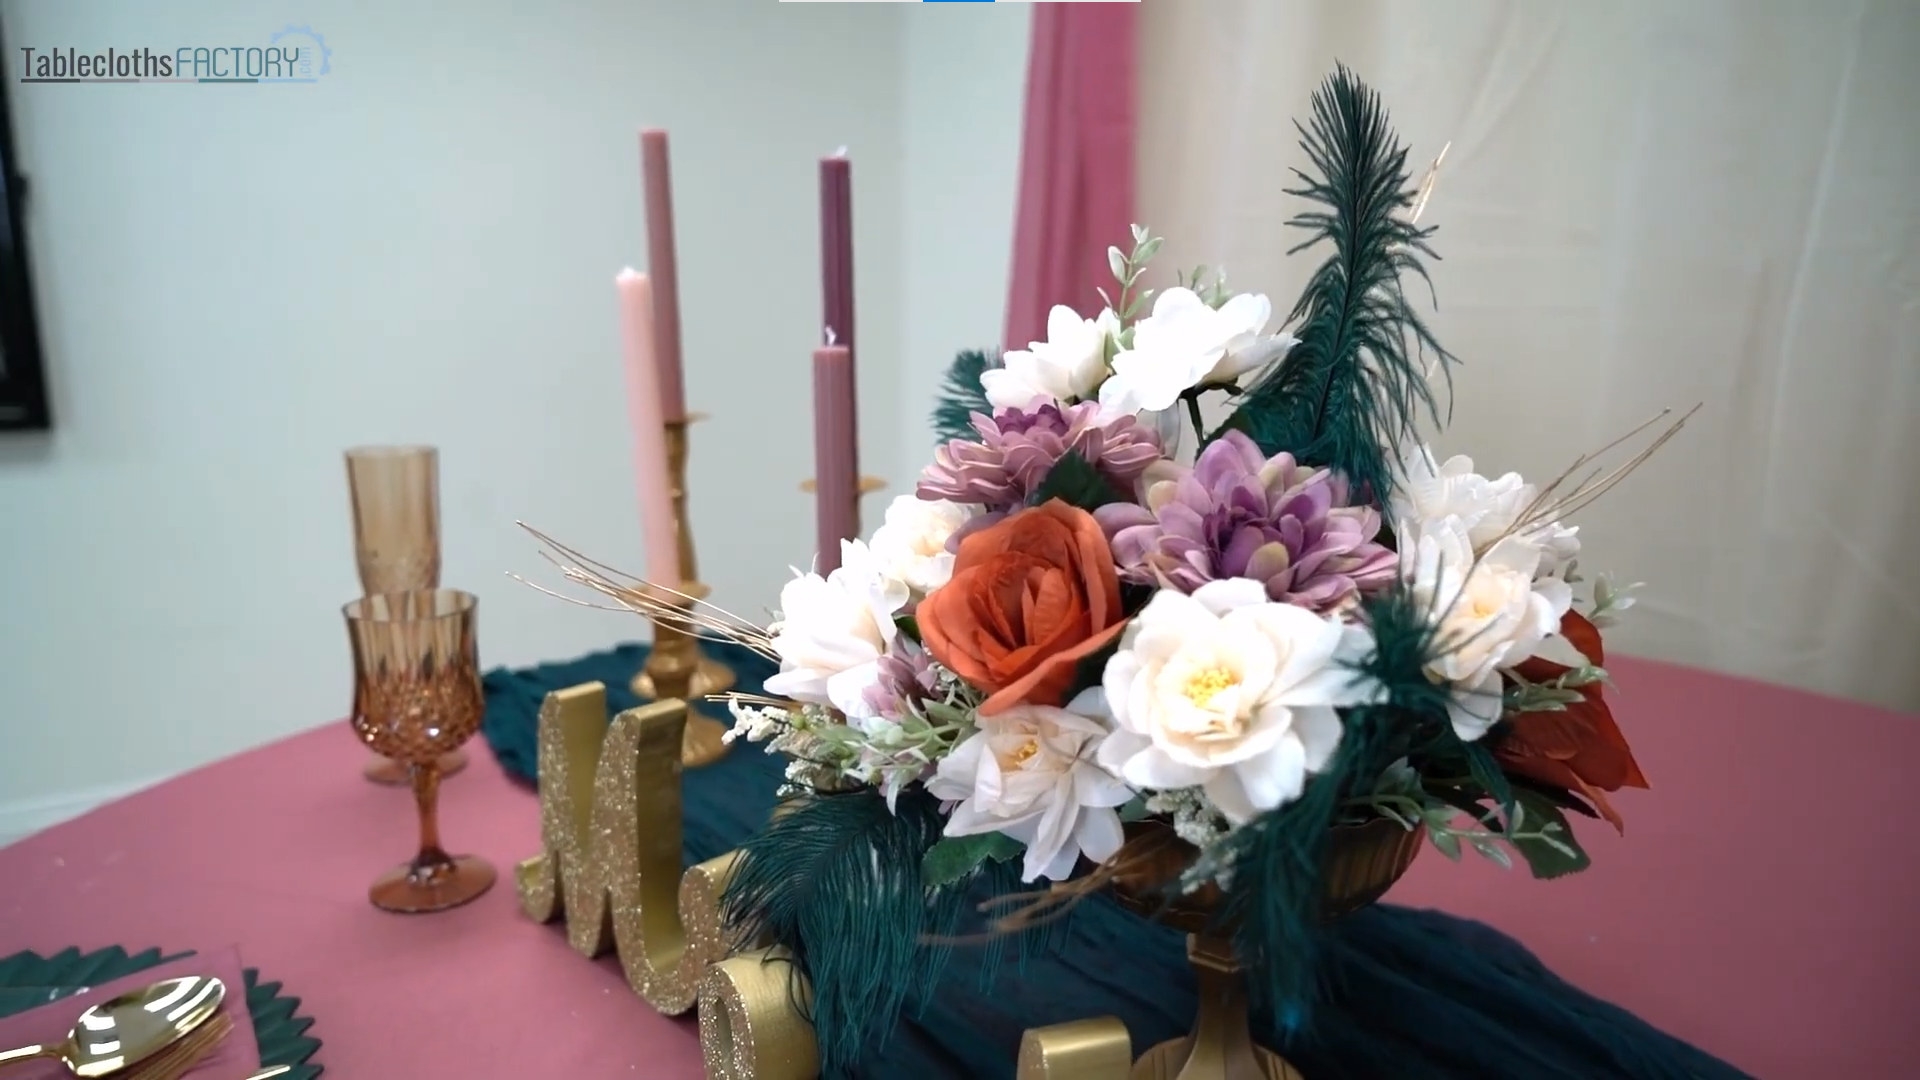 Artificial flowers, candles, and candle holders arranged on the table